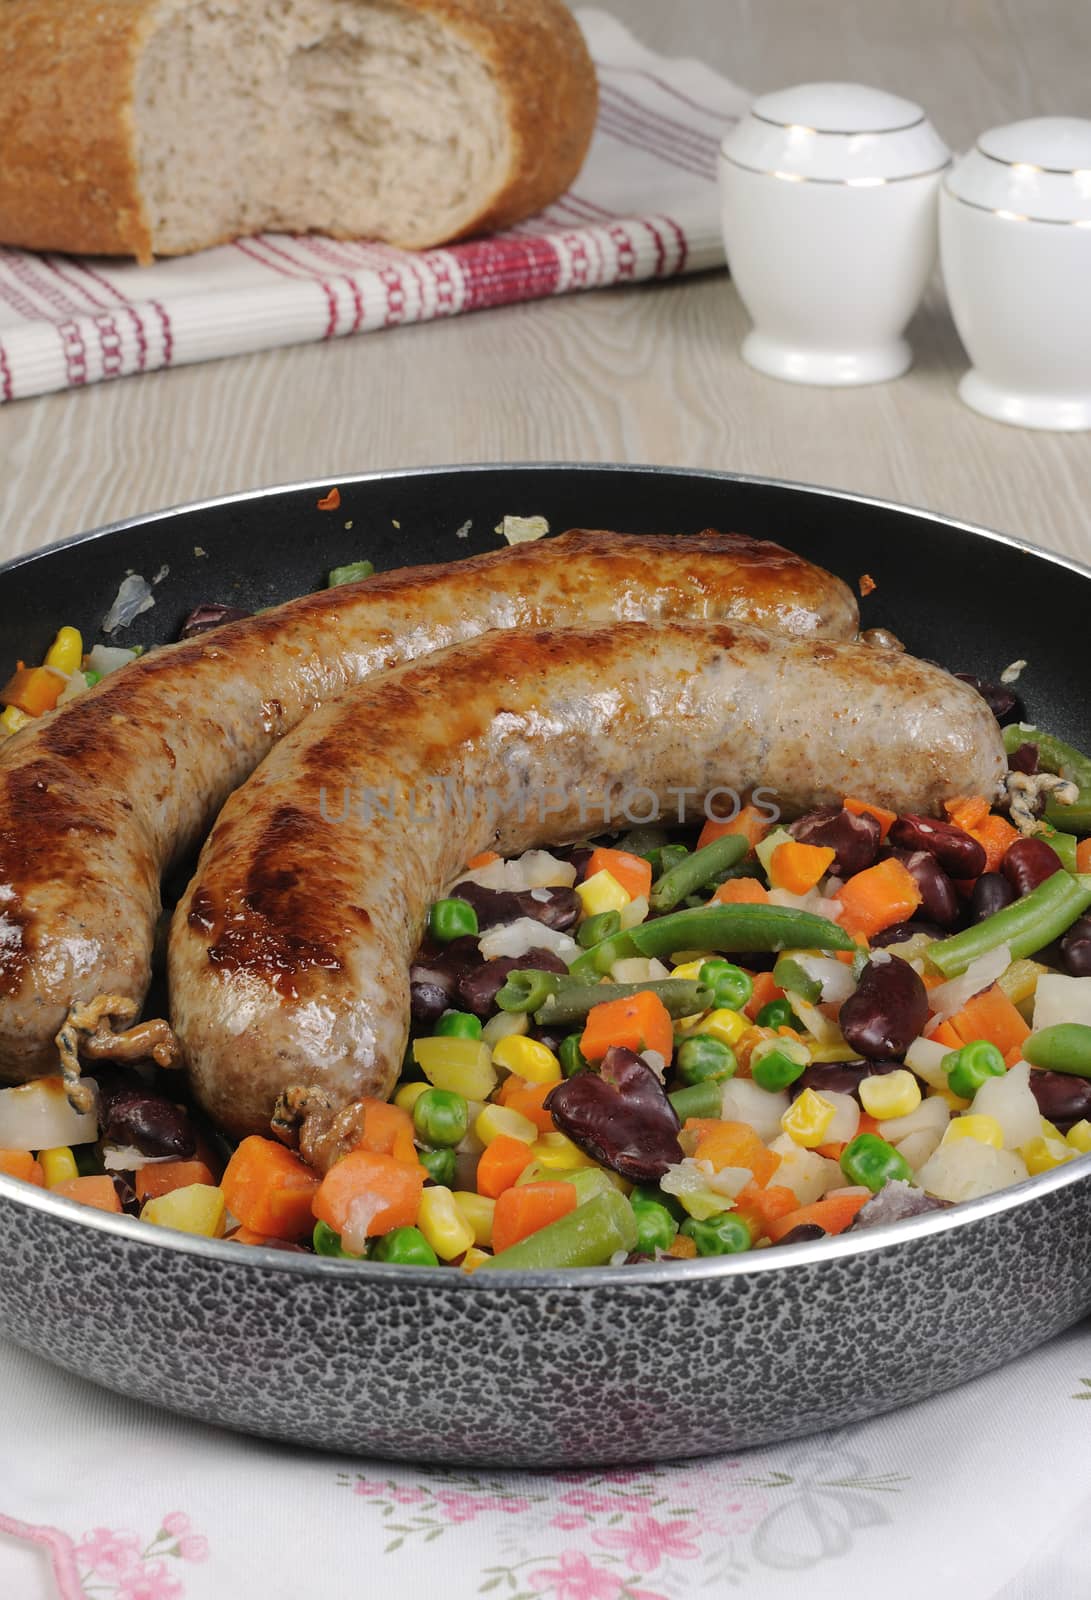 Homemade sausages with vegetables by Apolonia